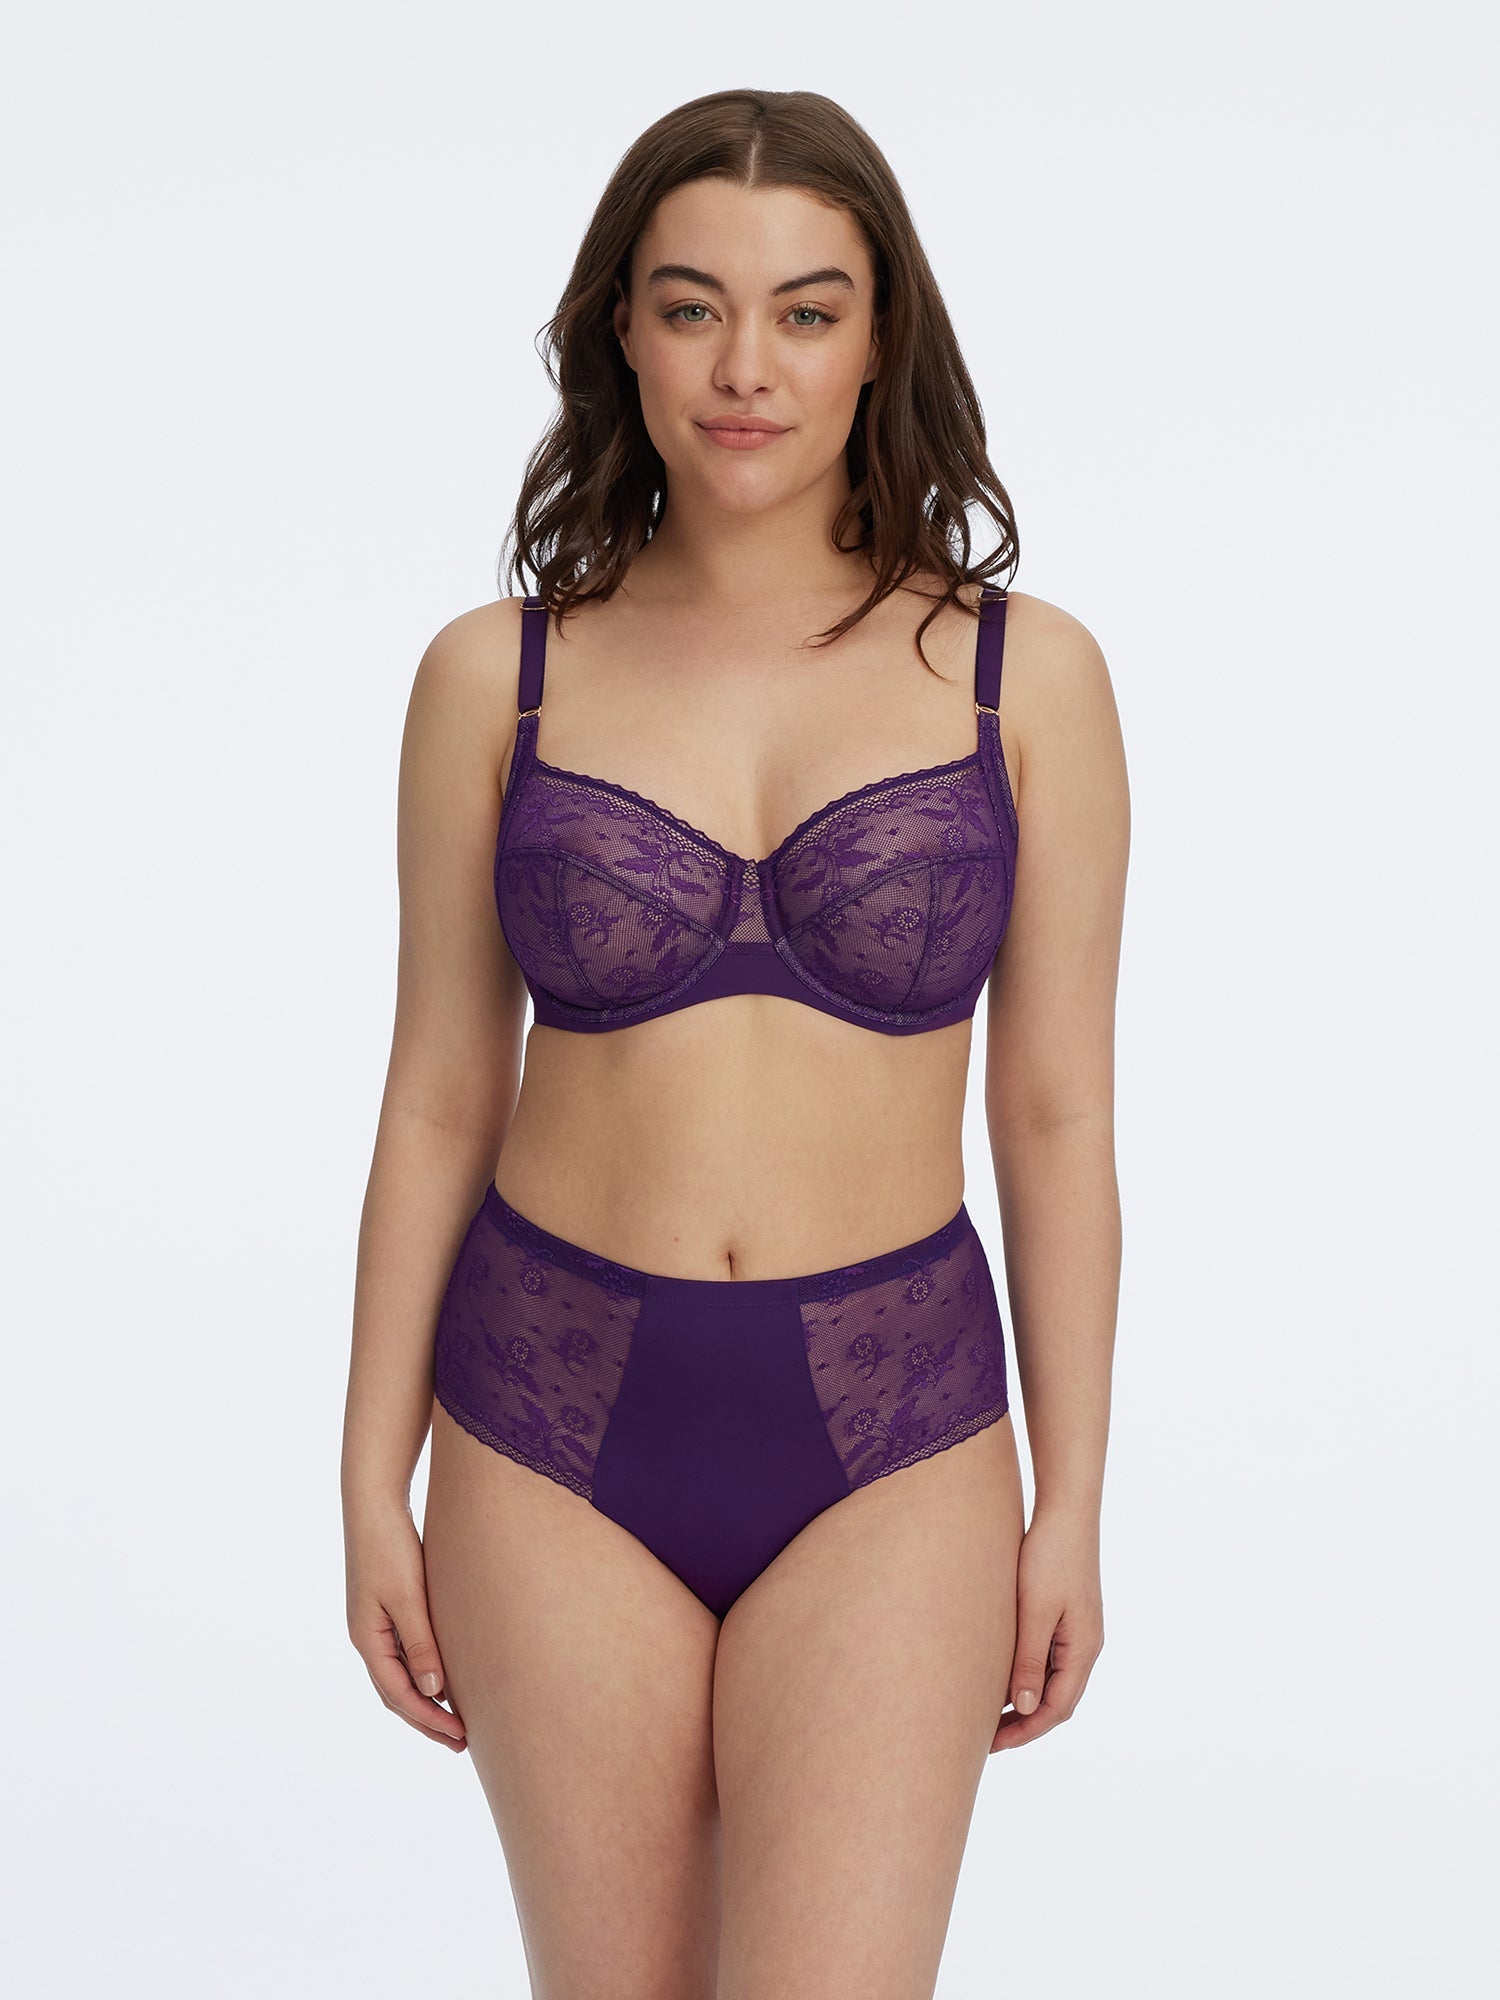 Lacy High Rise Brief - Pinned Up Bra Lounge